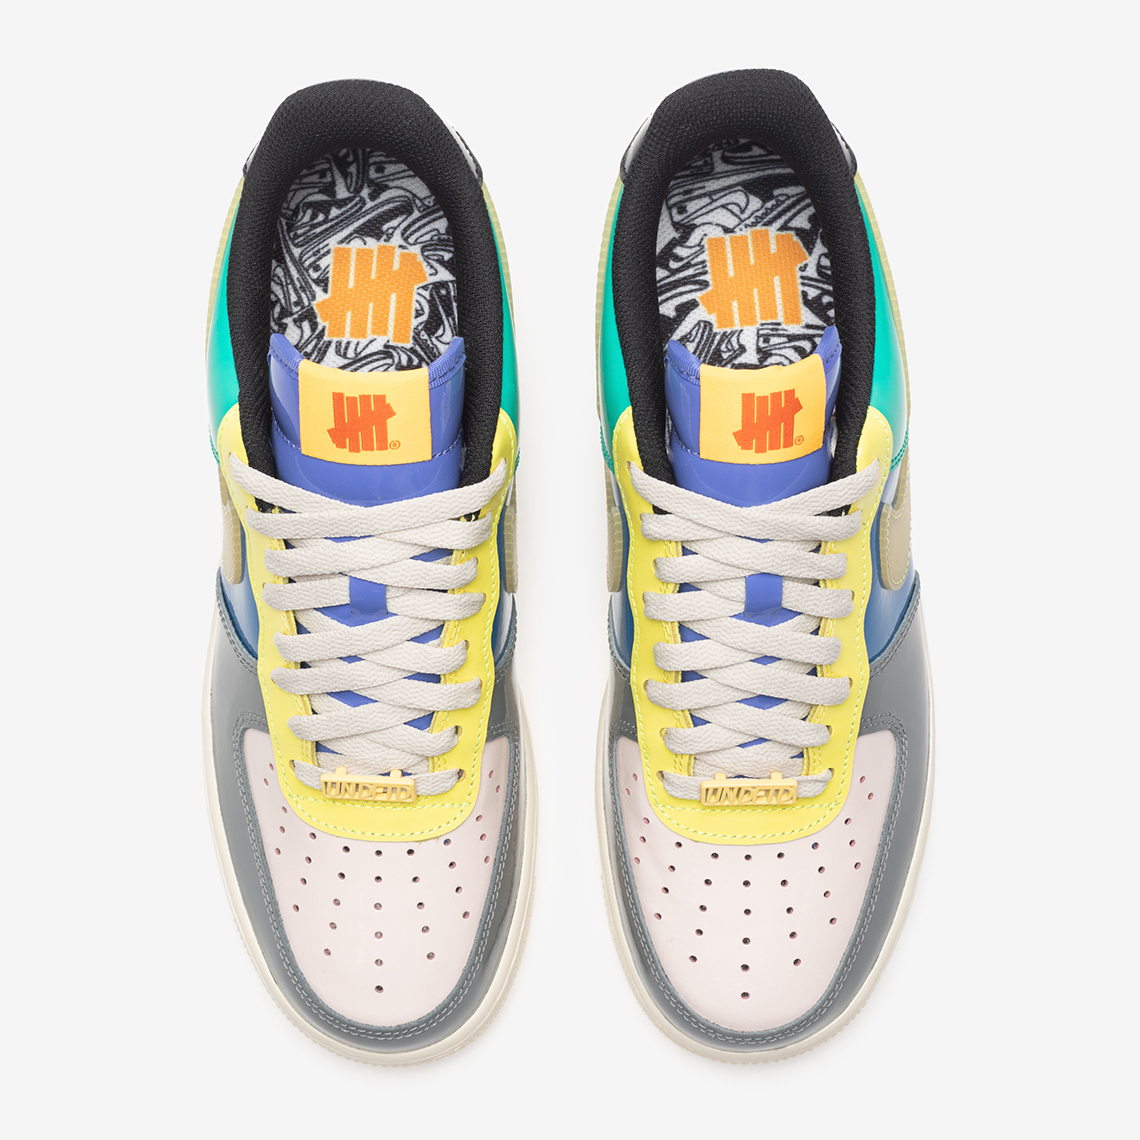 Undefeated vintage nike tile cross trainer shoes for women asics Topaz Gold Release Info 2